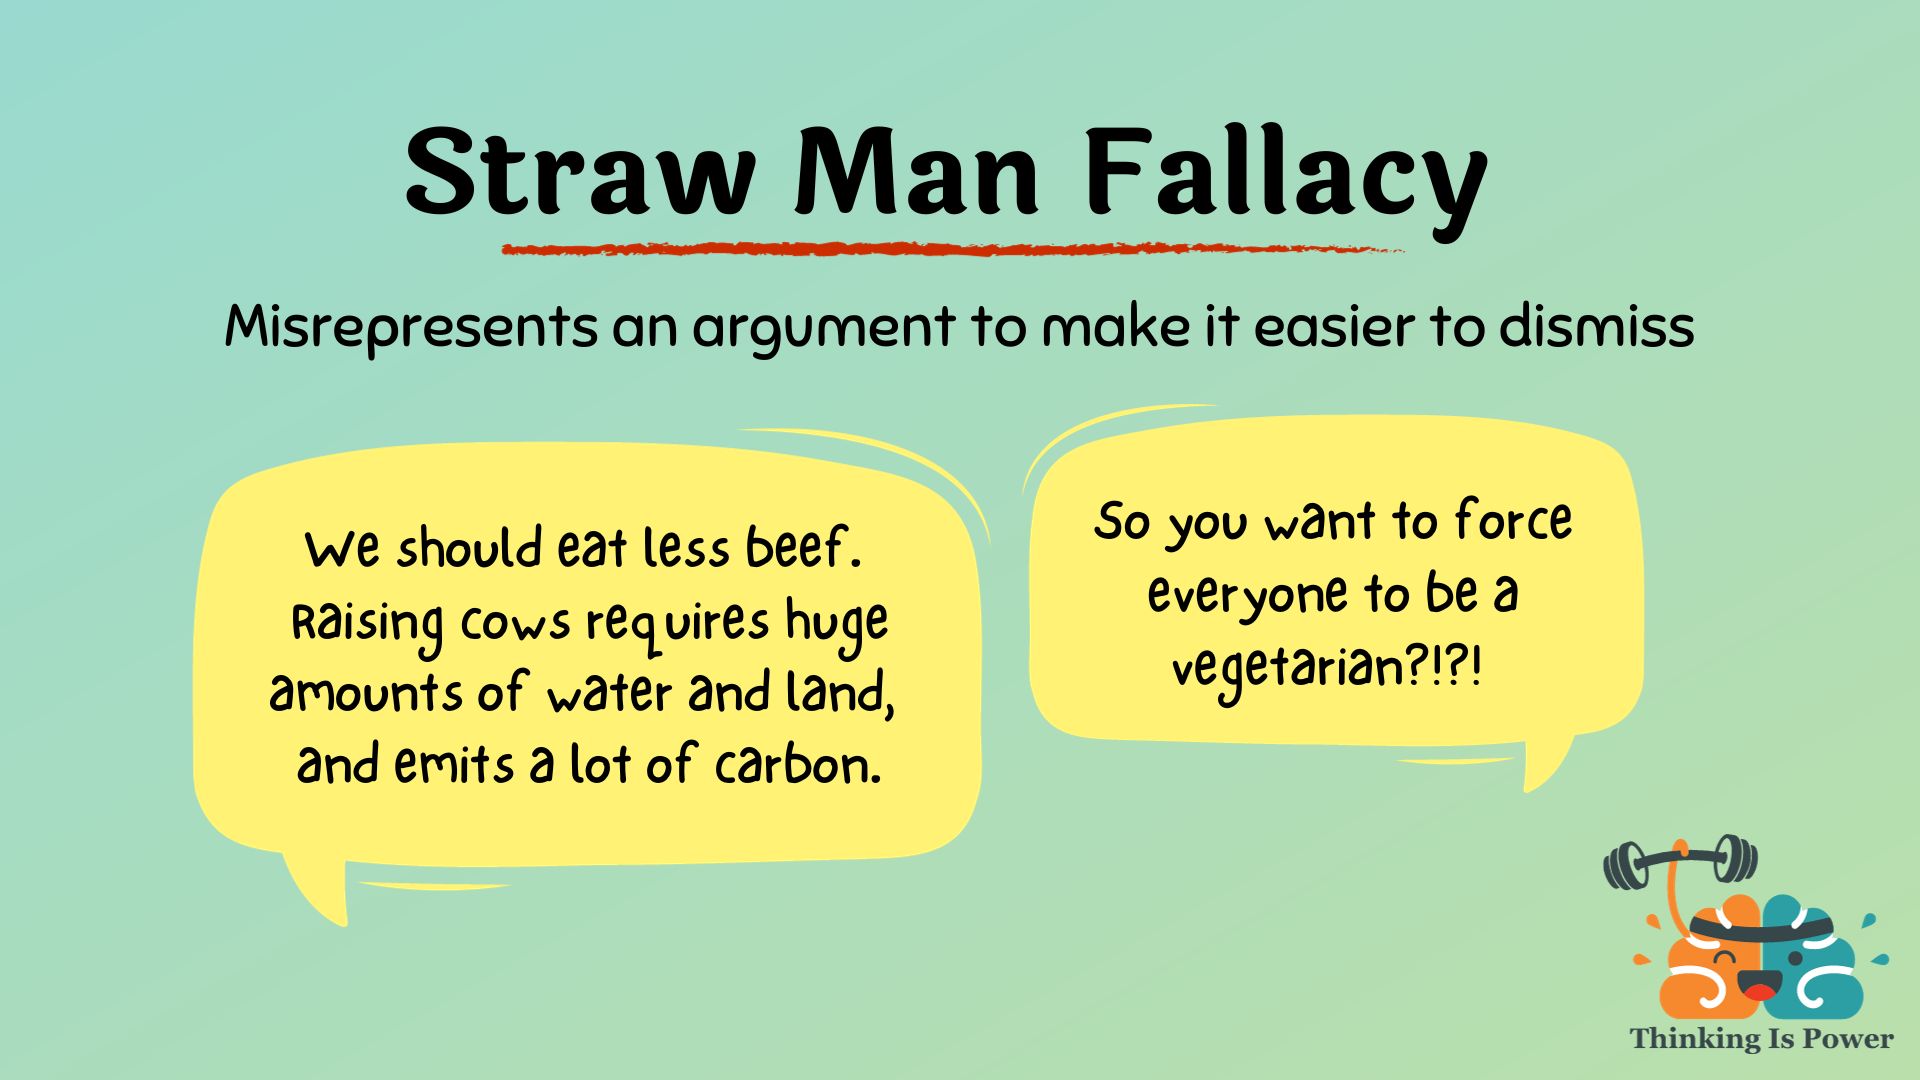 Straw man fallacy mispresents someone's argument to make it easier to dismiss; example is someone who says we should eat less beef because of its environmental impact and the response is you want everyone to be a vegetarian?